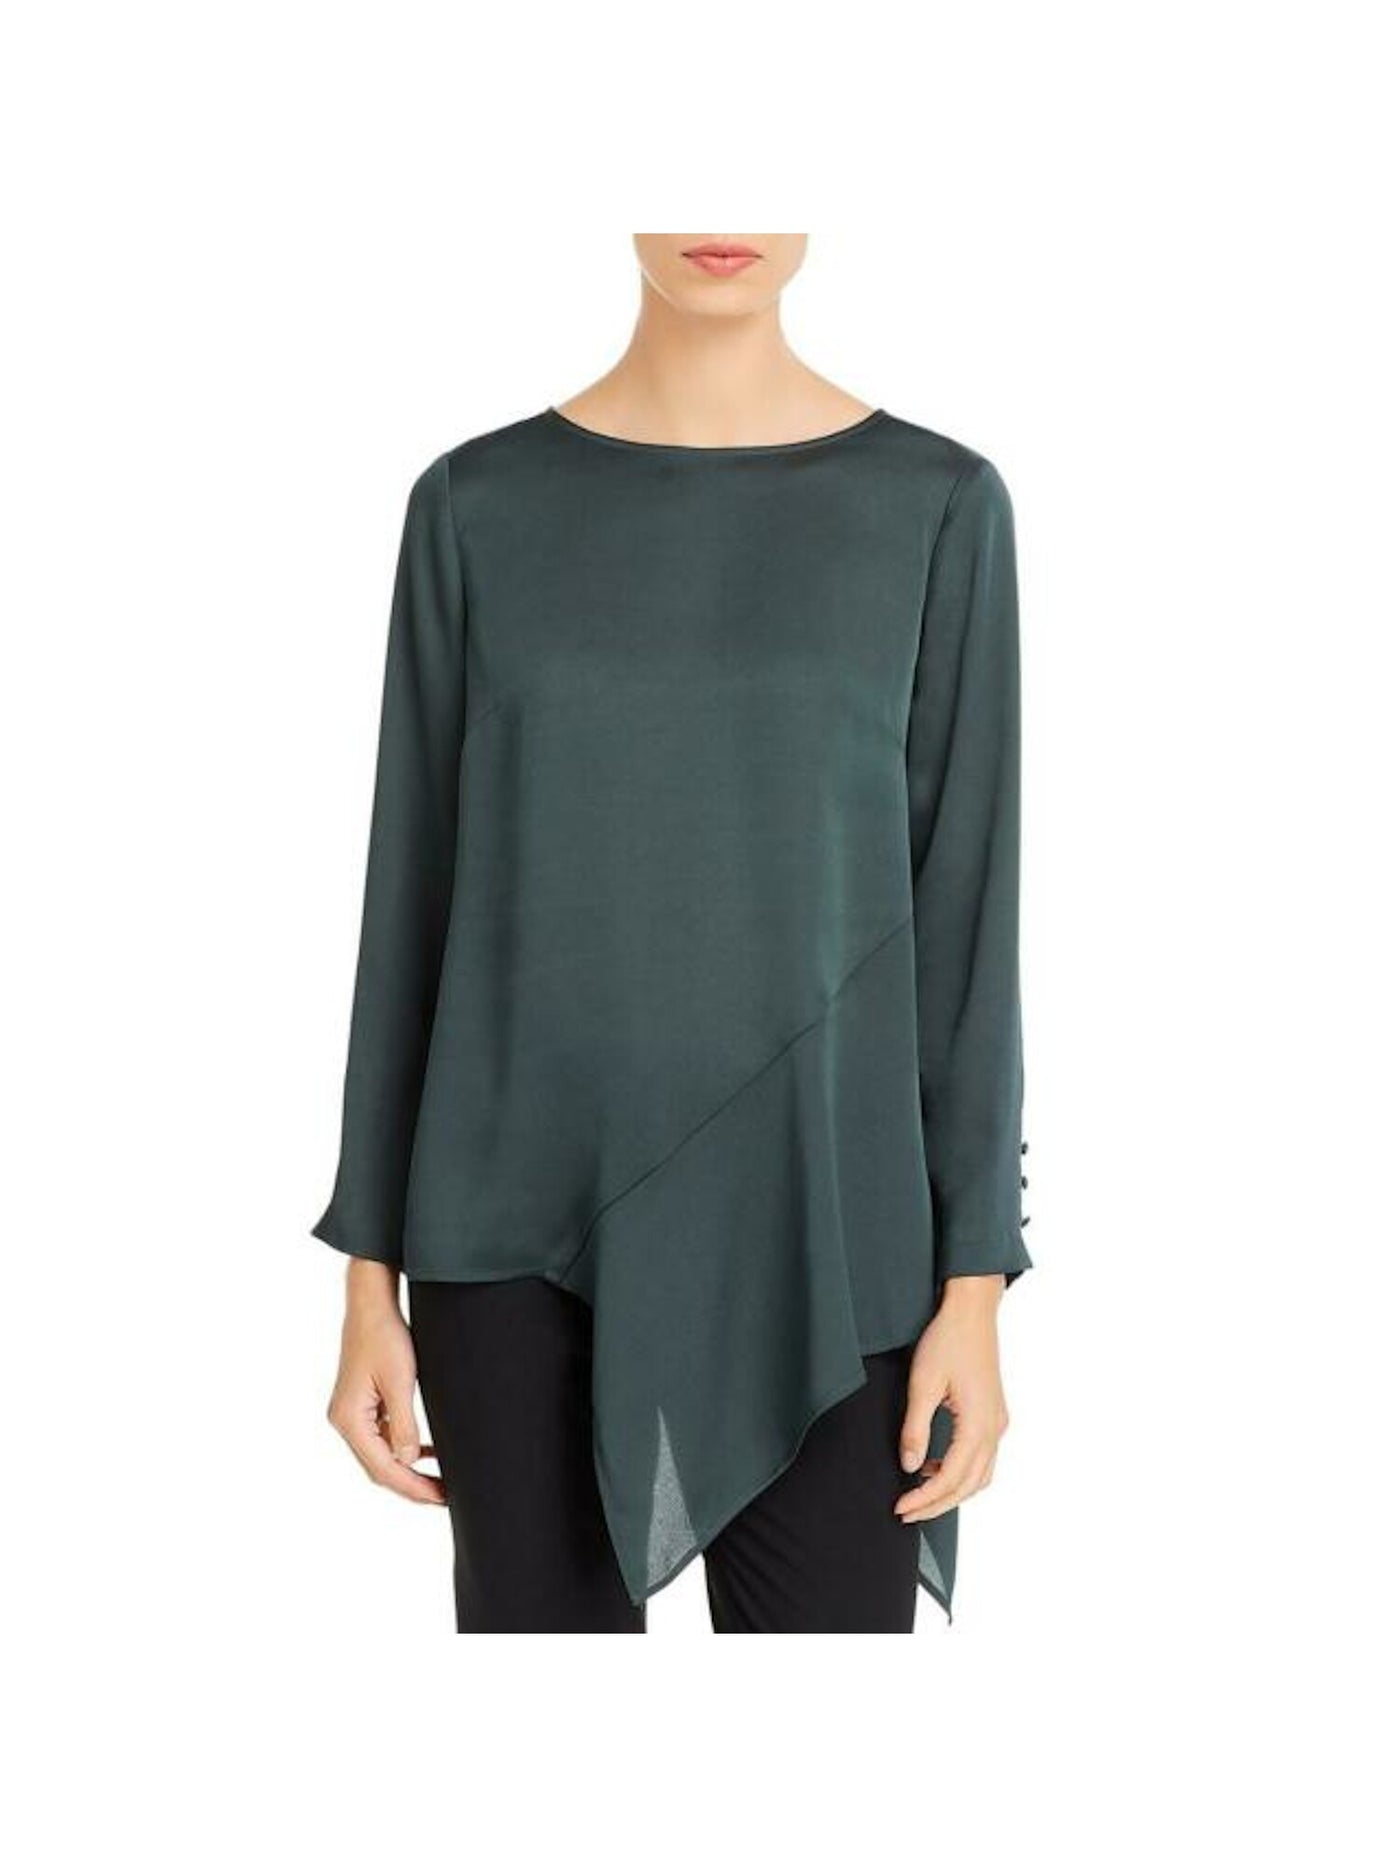 VINCE CAMUTO Womens Green Long Sleeve Crew Neck Blouse M